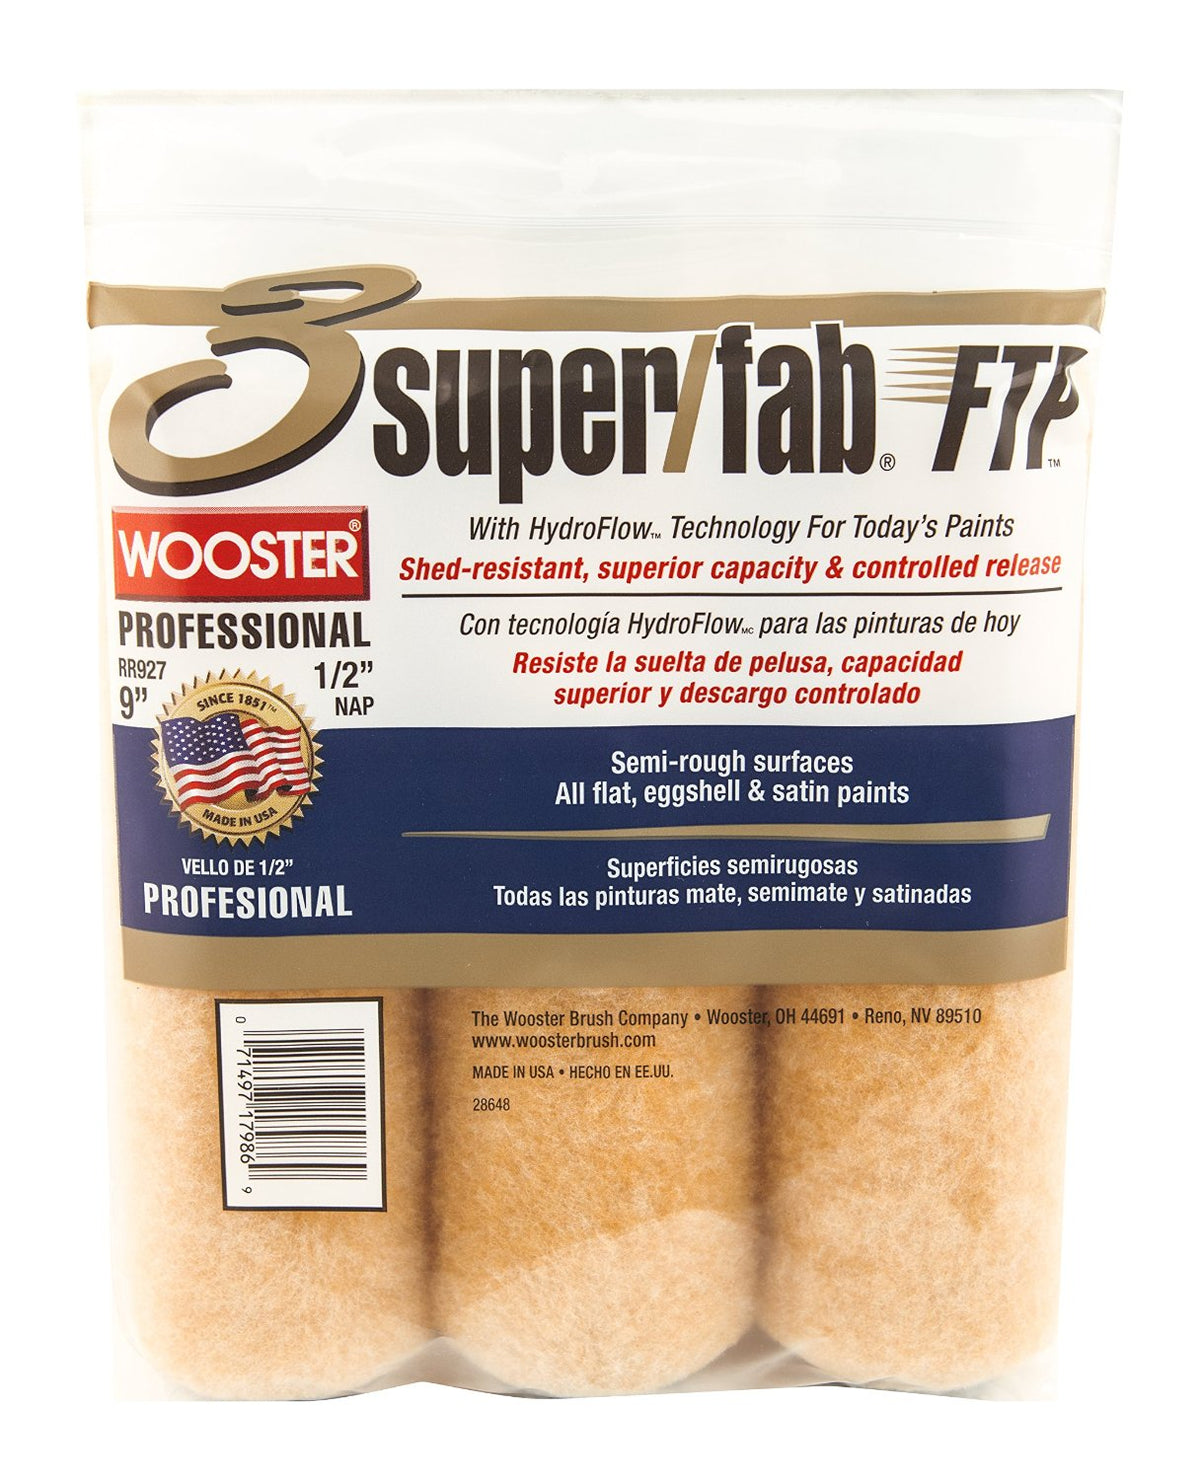 Wooster RR927-9 Super Fab FTP Roller Cover, 9" x 1/2"